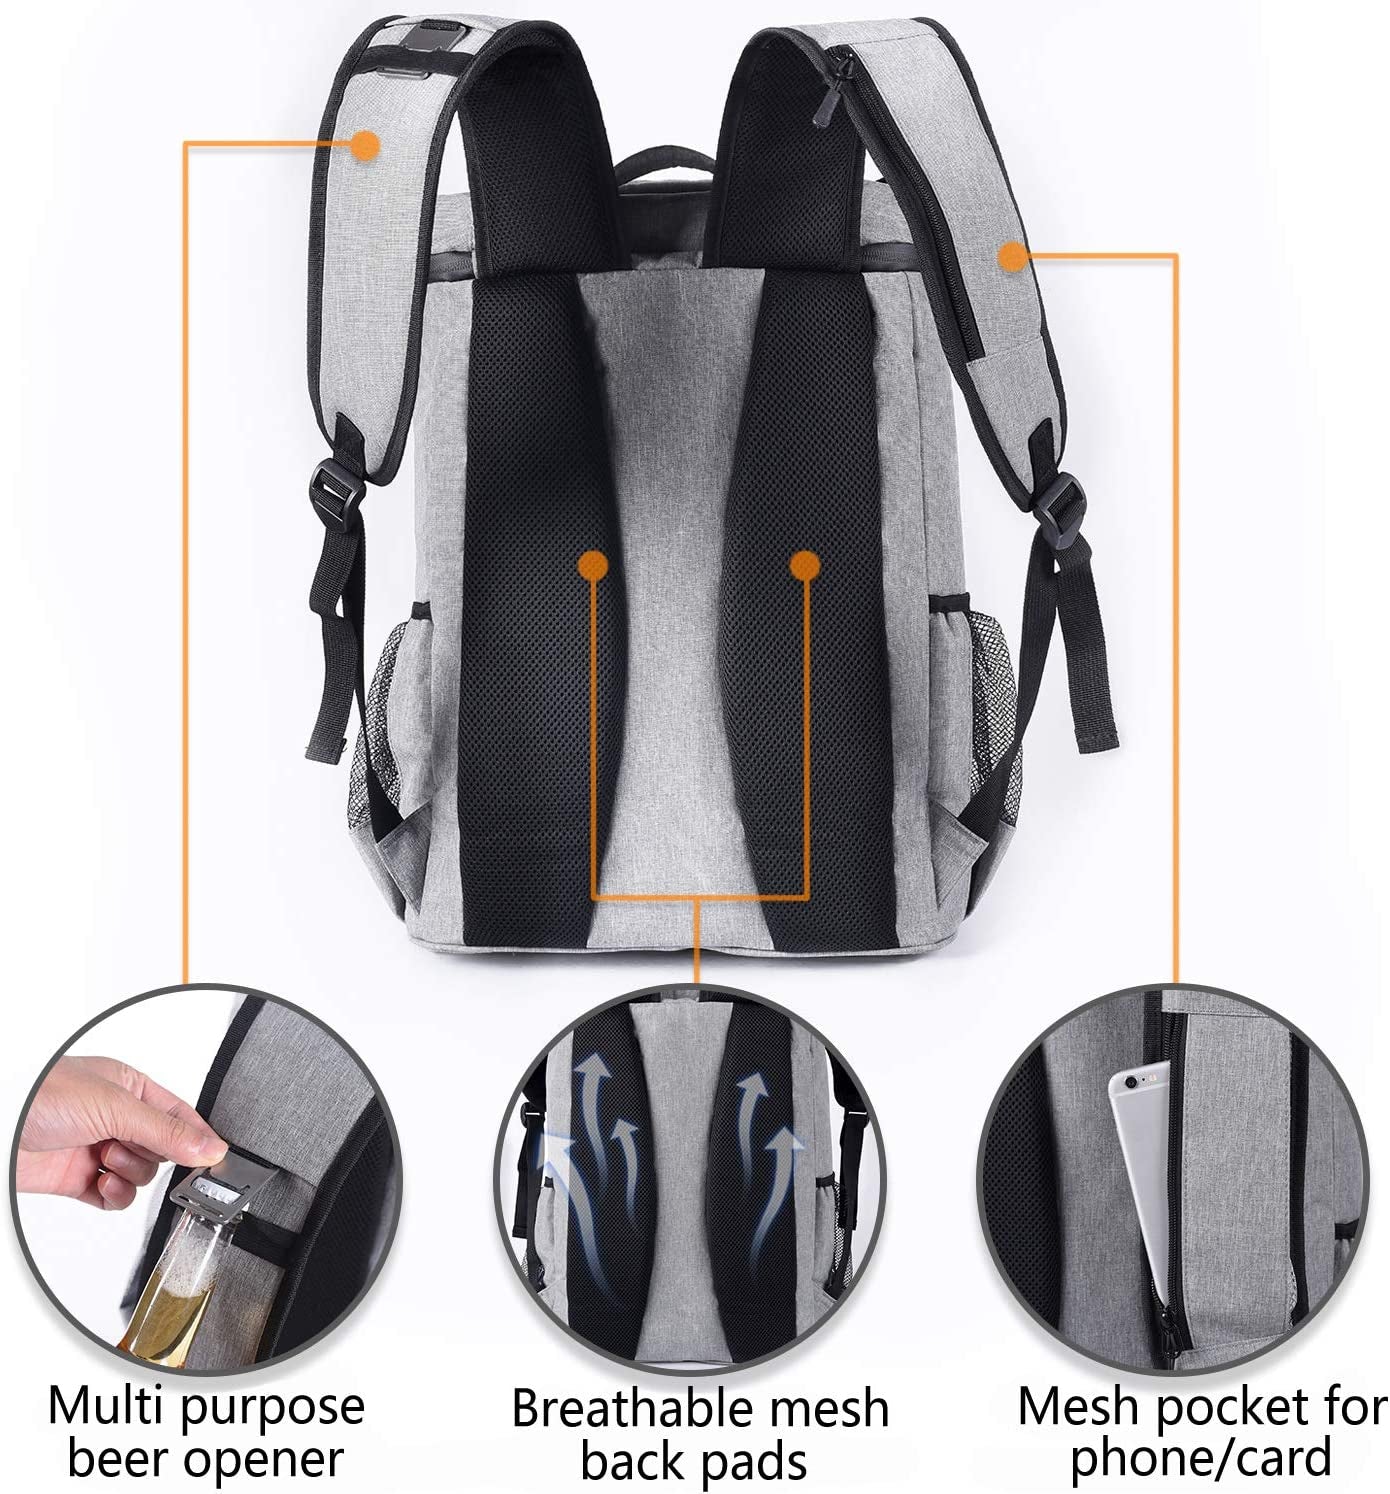 Chill Trail backpack cooler